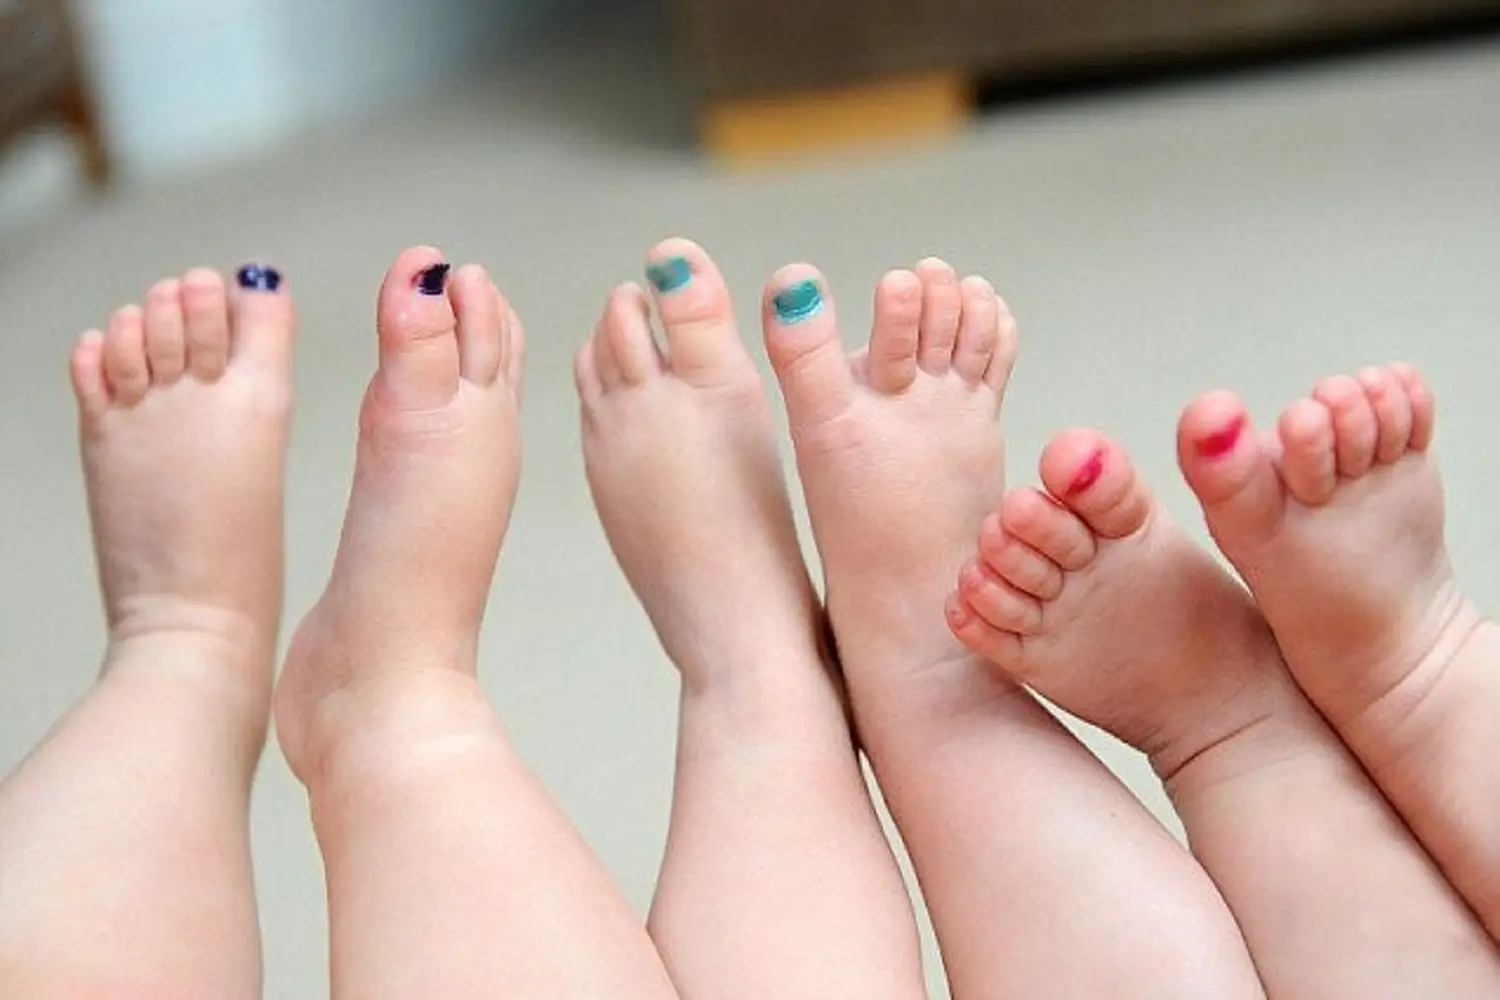 The primary method of distinguishing between their three identical offspring is the color of their toenails.